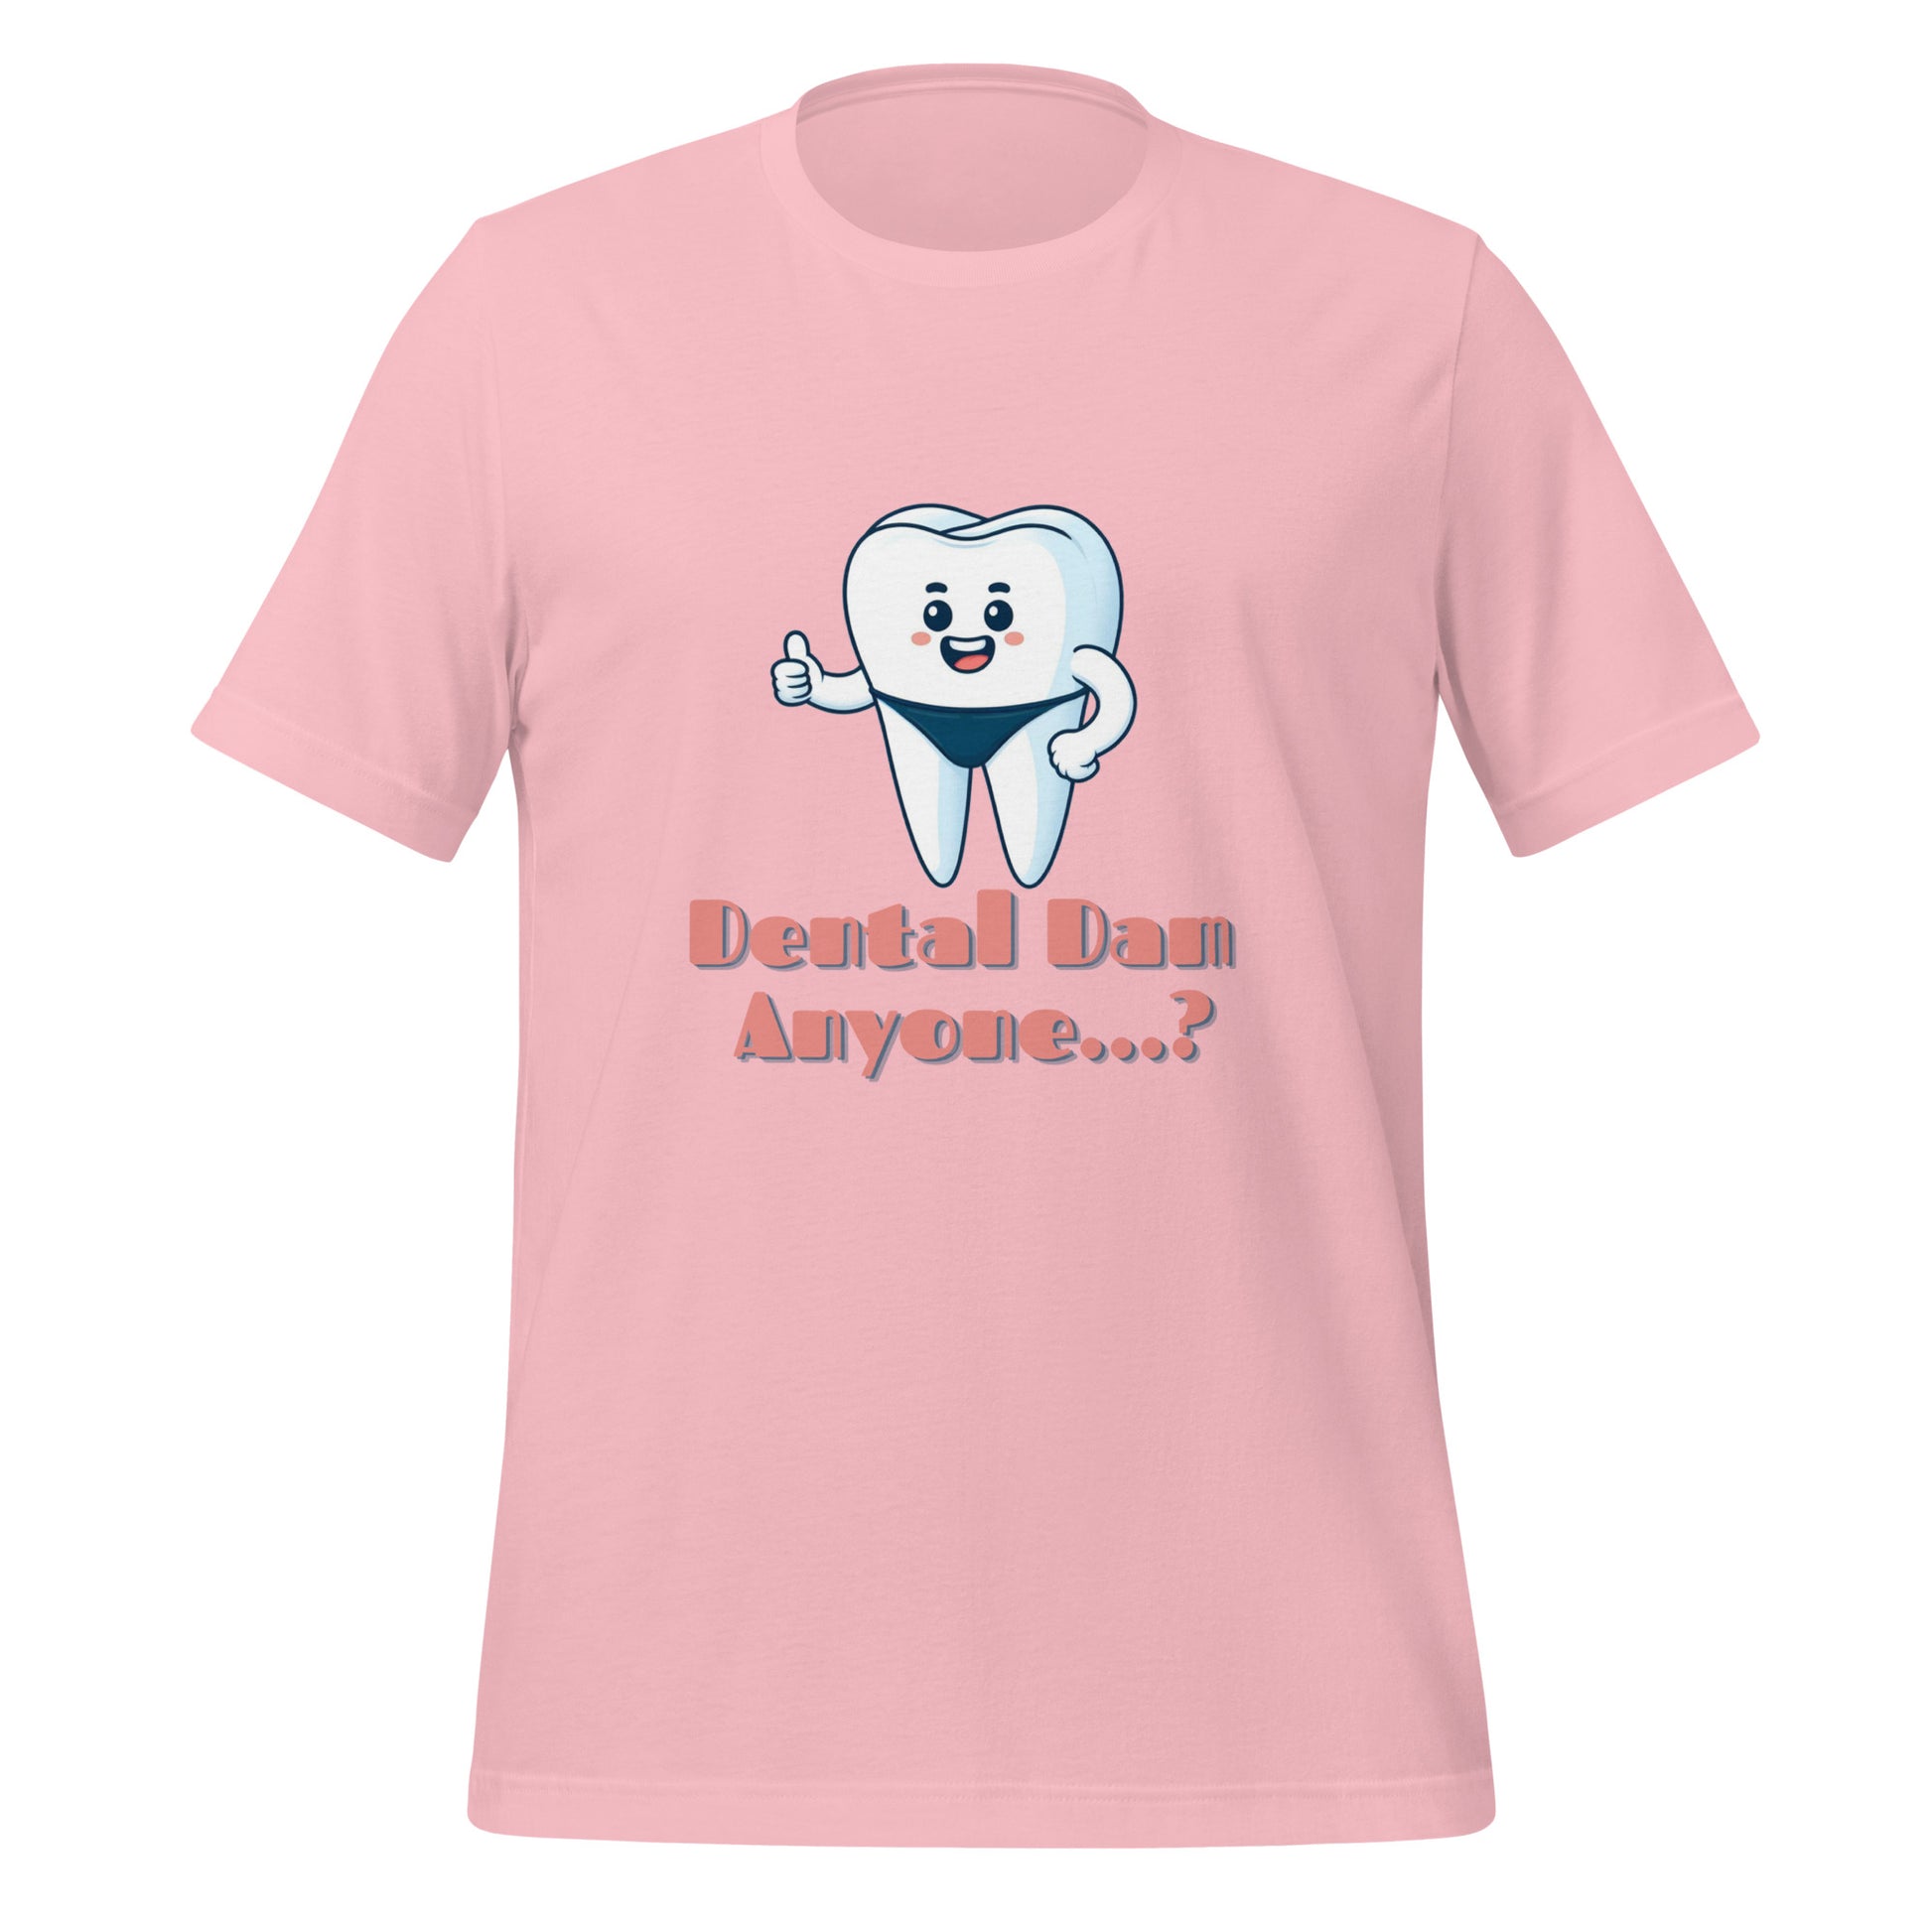 Funny dental shirt featuring a playful tooth character in a speedo with the text ‘Dental Dam Anyone?’, perfect for dentists, dental hygienists, and dental students who enjoy dental humor. This dental shirt is a unique addition to any dental professional’s wardrobe, making it an ideal dental office shirt. Don’t miss out on our dental assistant shirts and dental hygiene shirts. Pink color.